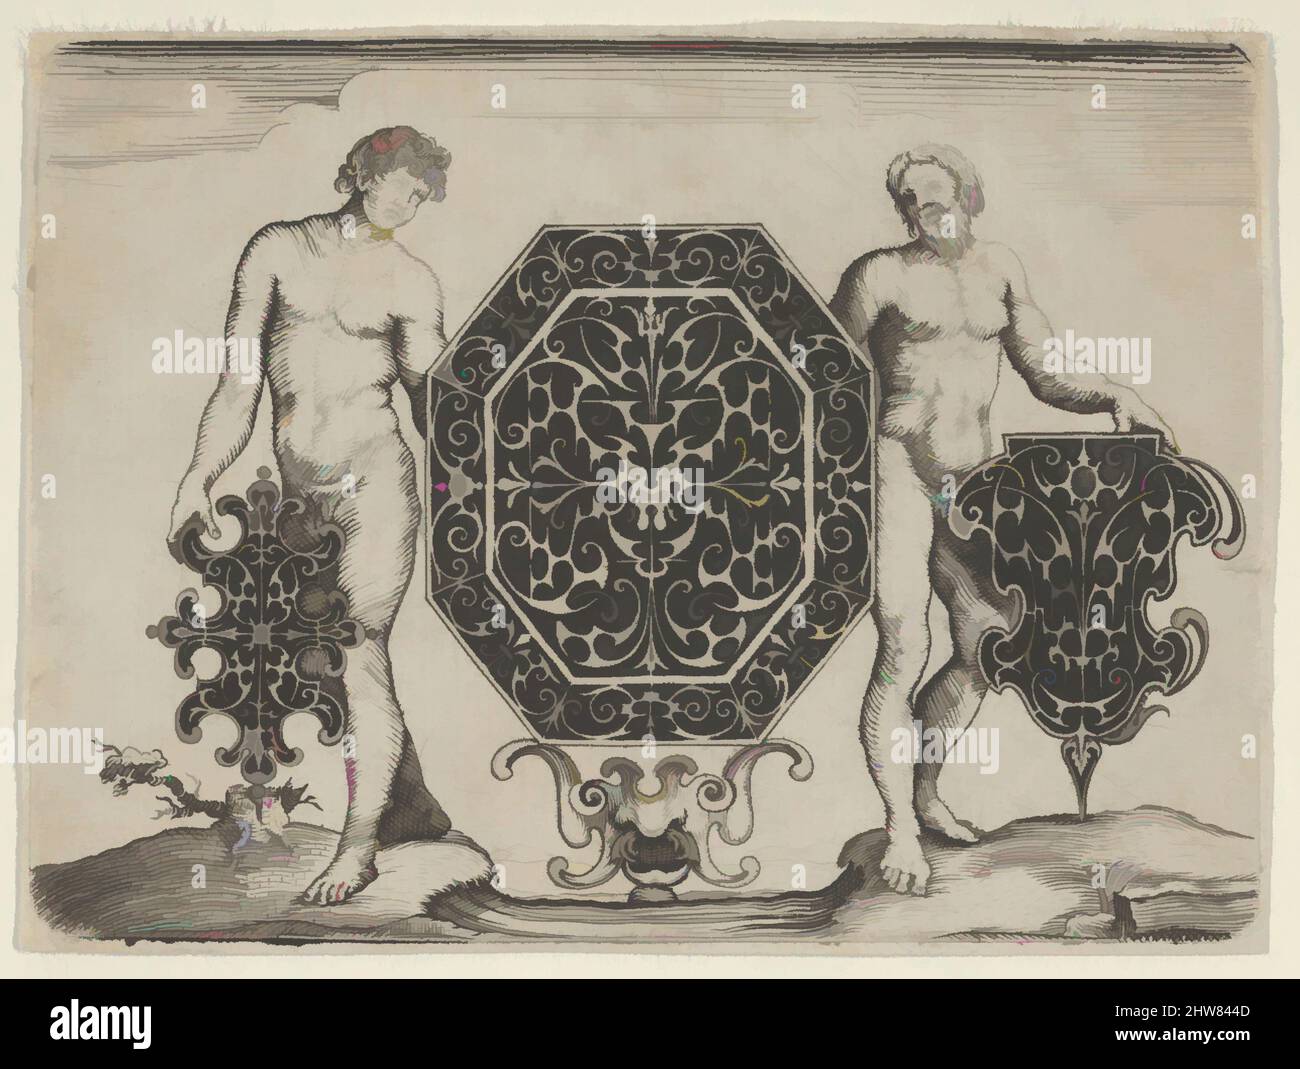 Art inspired by Octagonal Case and Two Other Motifs Held by Ignudi, 1622, Blackwork and Engraving, Plate: 3 1/16 x 4 3/16 in. (7.8 x 10.6 cm), Print from a series of six with goldsmith's designs in blackwork. This print shows three designs for goldsmith's work, placed in a landscape, Classic works modernized by Artotop with a splash of modernity. Shapes, color and value, eye-catching visual impact on art. Emotions through freedom of artworks in a contemporary way. A timeless message pursuing a wildly creative new direction. Artists turning to the digital medium and creating the Artotop NFT Stock Photo